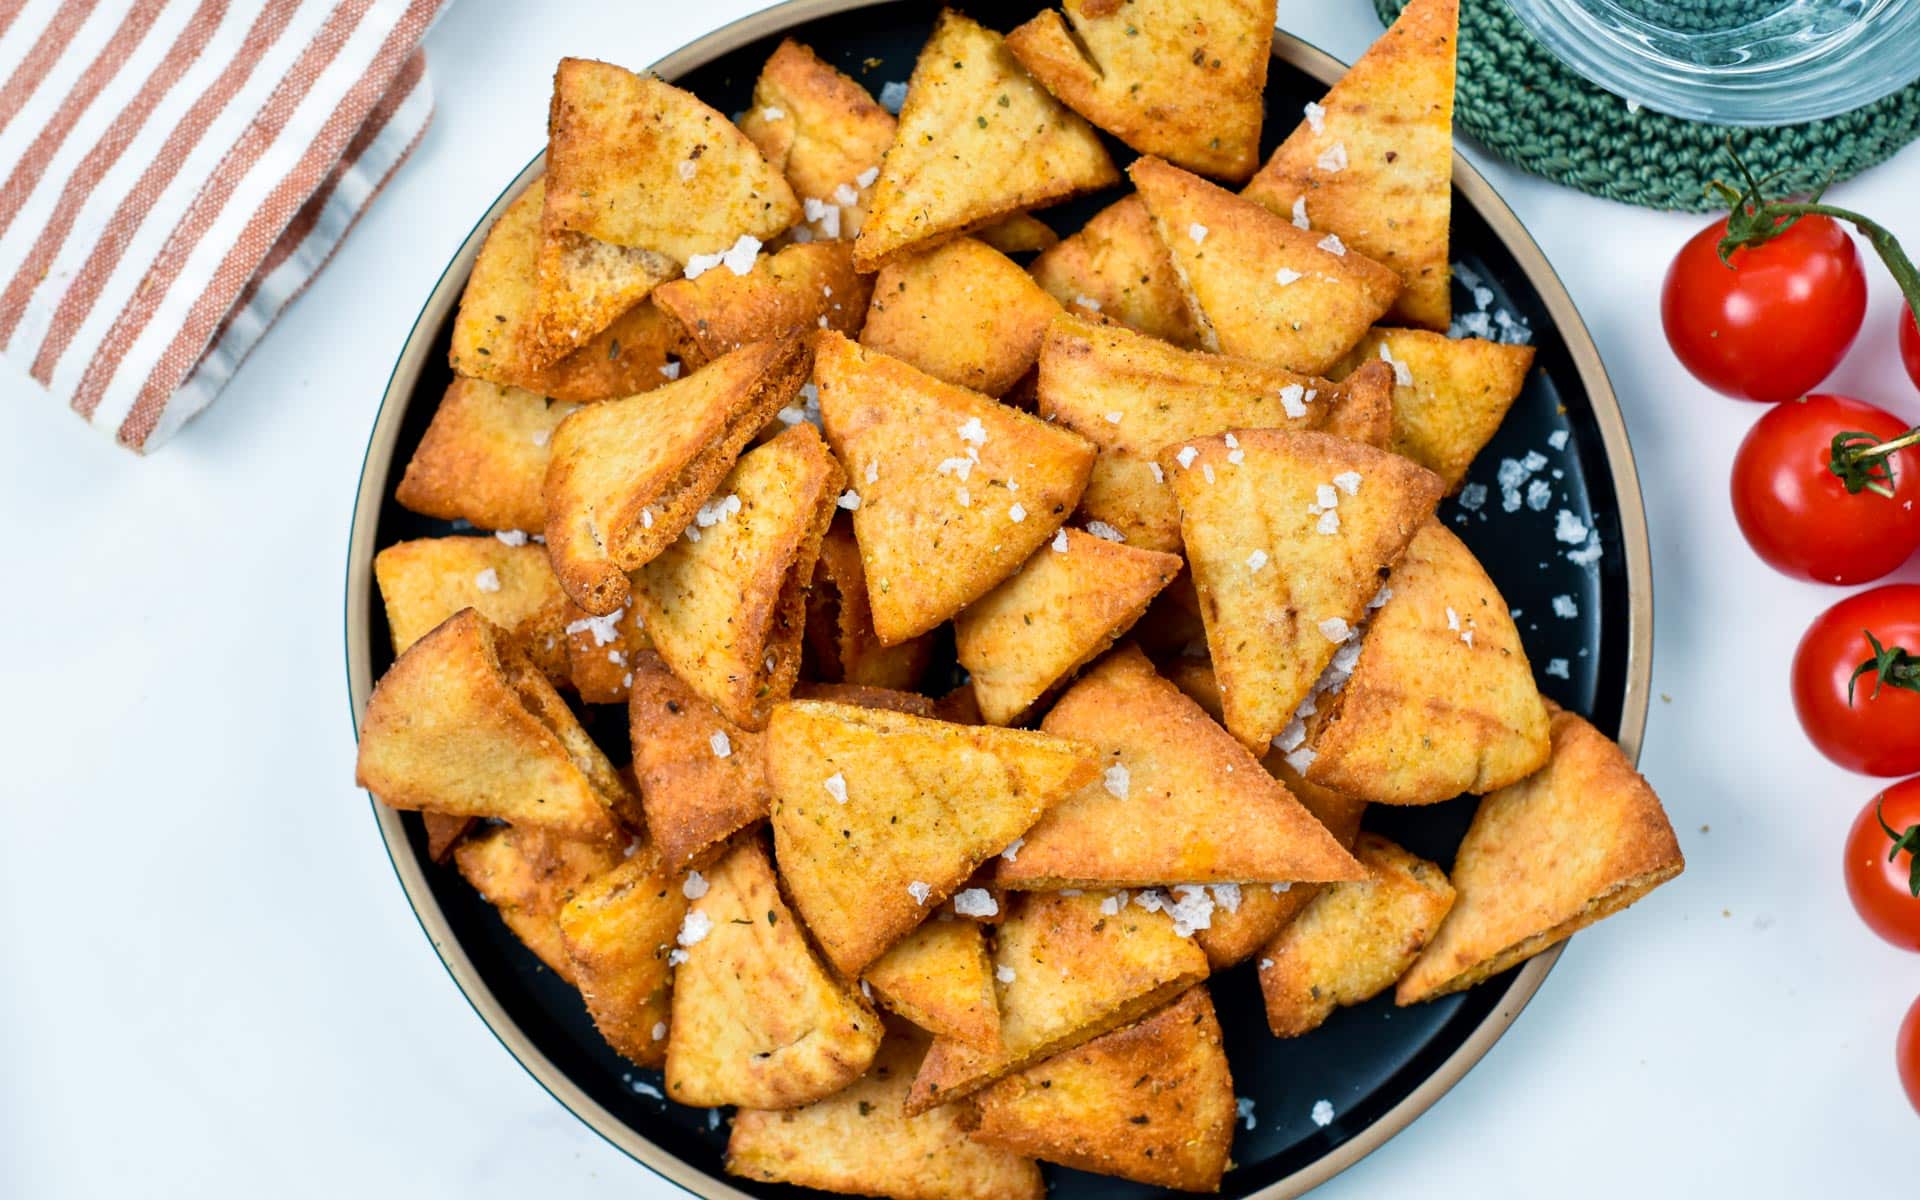 A plate of baked pita chips decorated with sea salt.